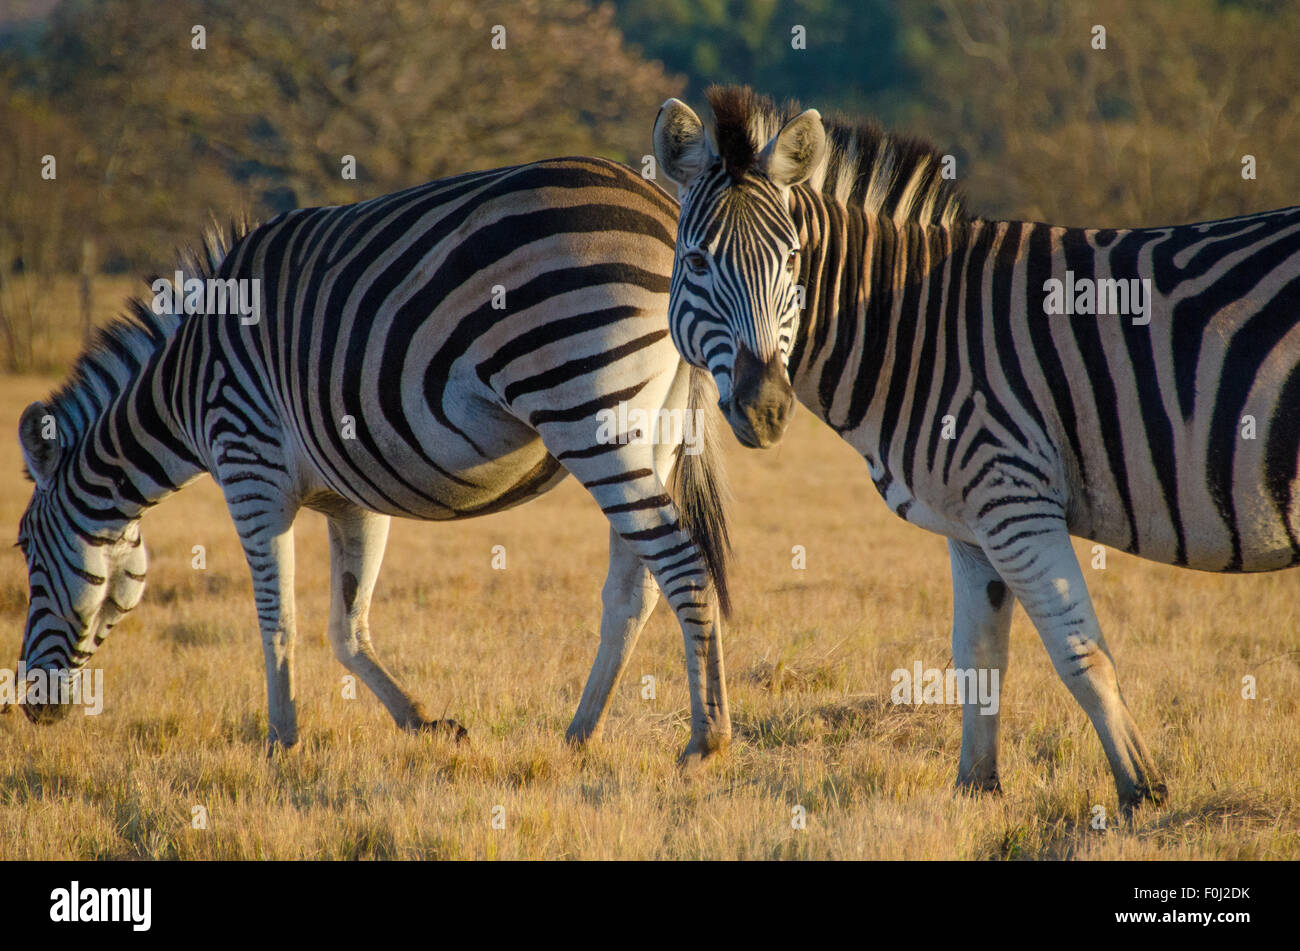 A herd of zebras graze at Mlilwane Wildlife Sanctuary in Swaziland as the sun begins to rise. Stock Photo